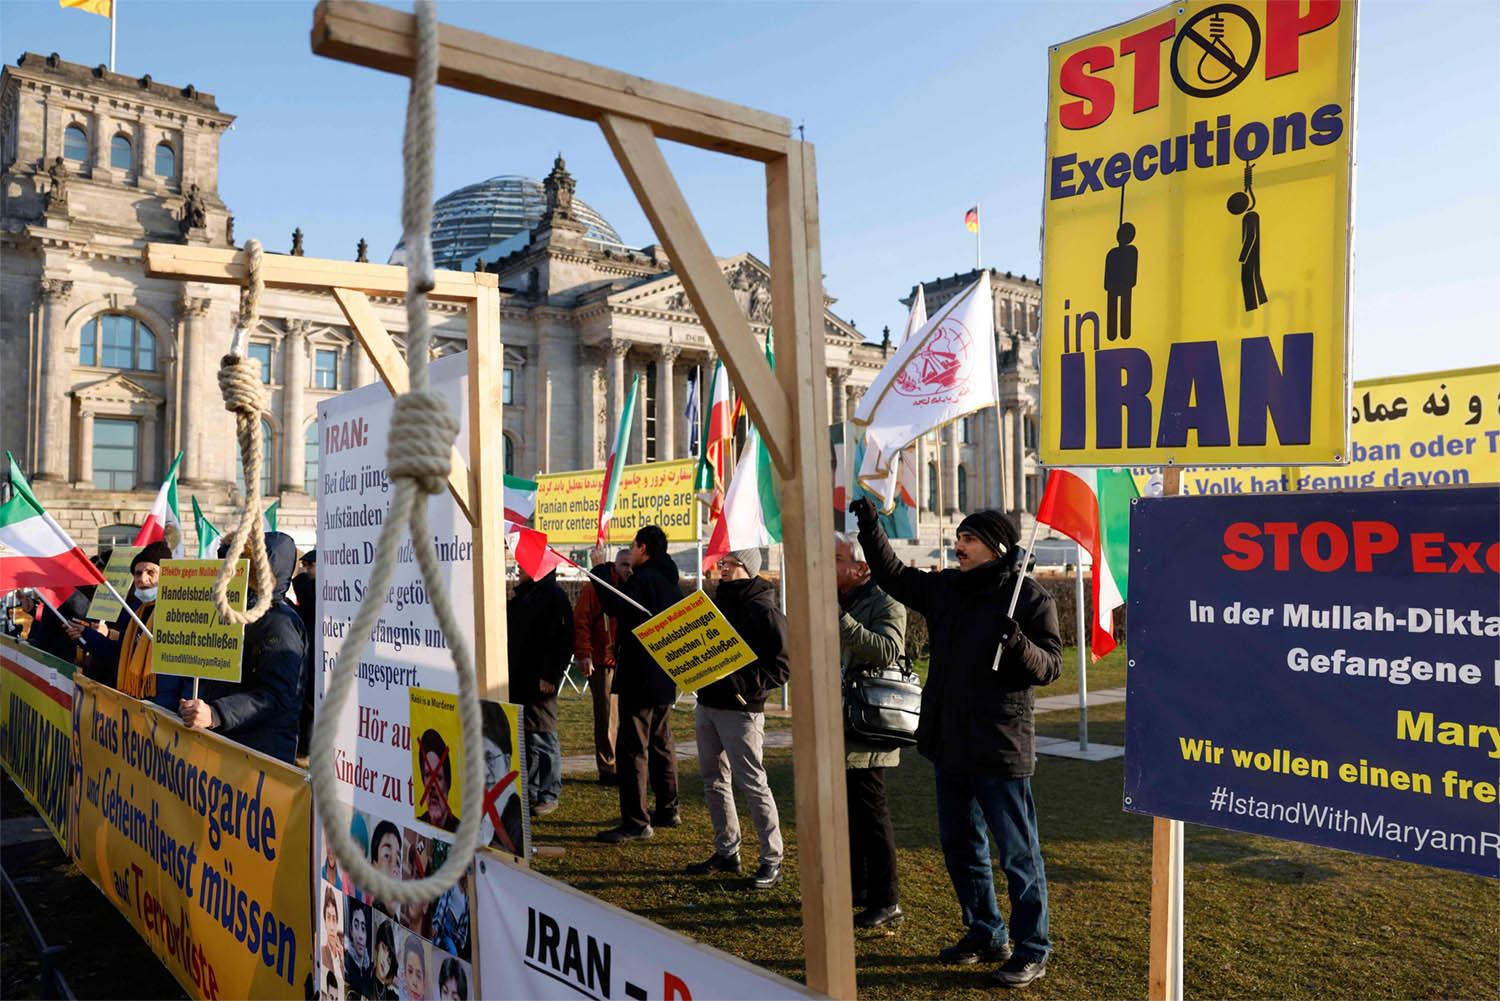 Washington called on Iran not to carry out the executions of the three men 